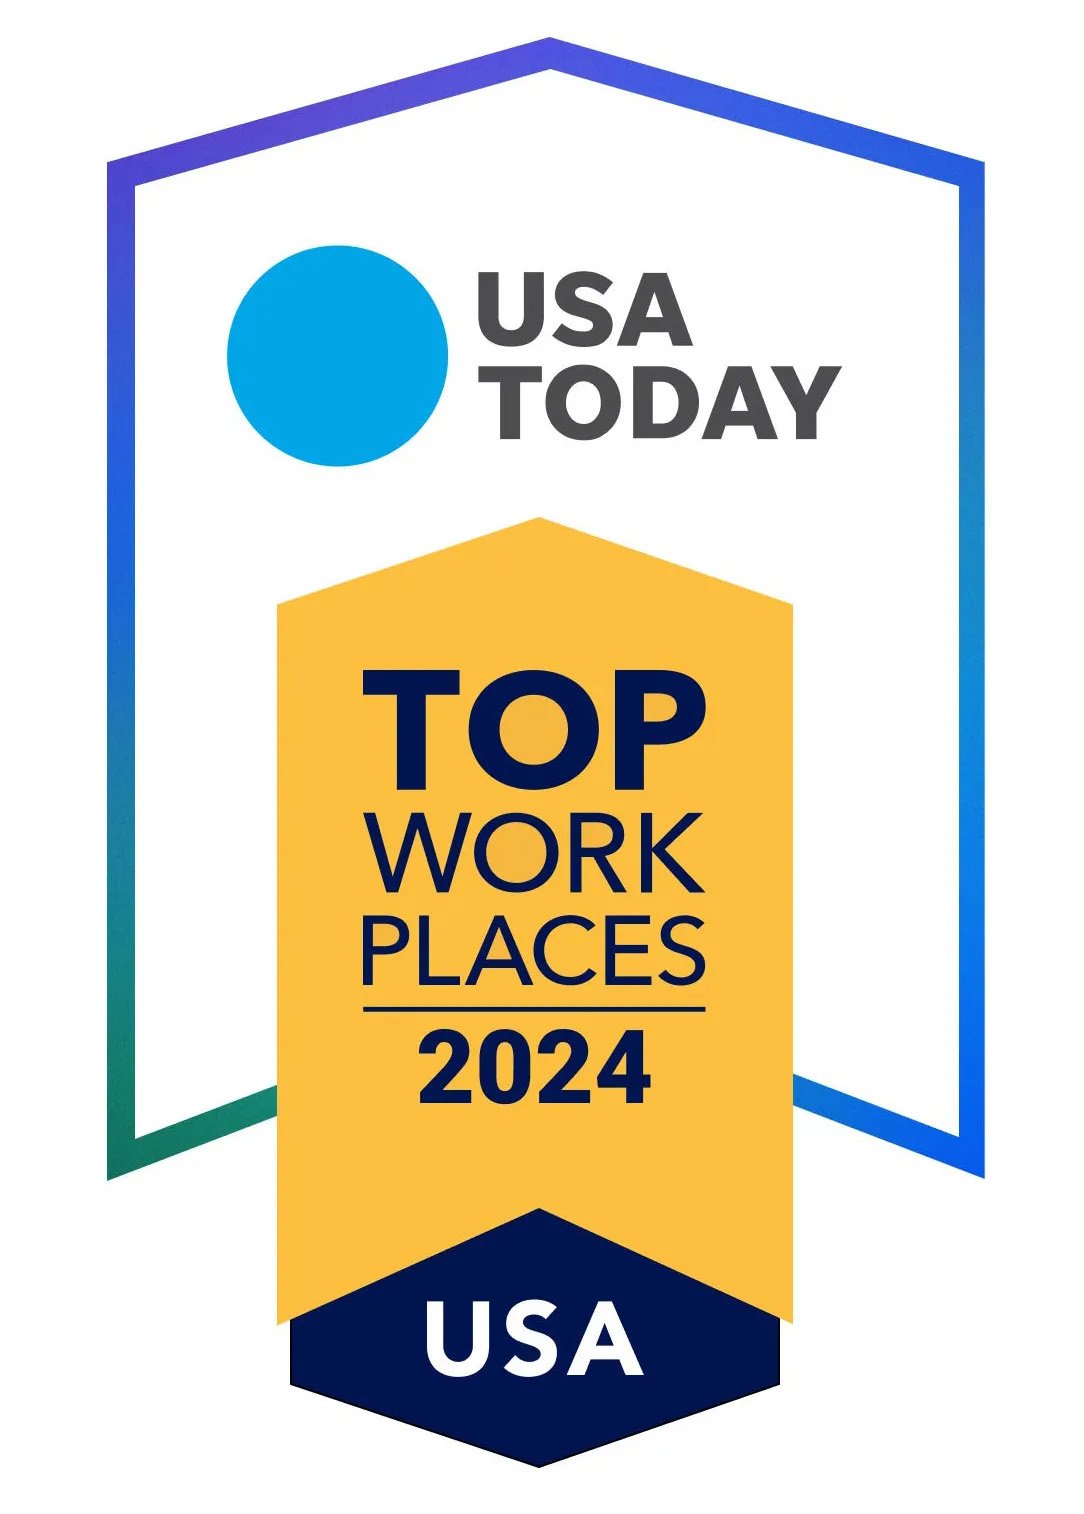 UTHealth Houston was named a top workplace in the U.S. by USA TODAY.